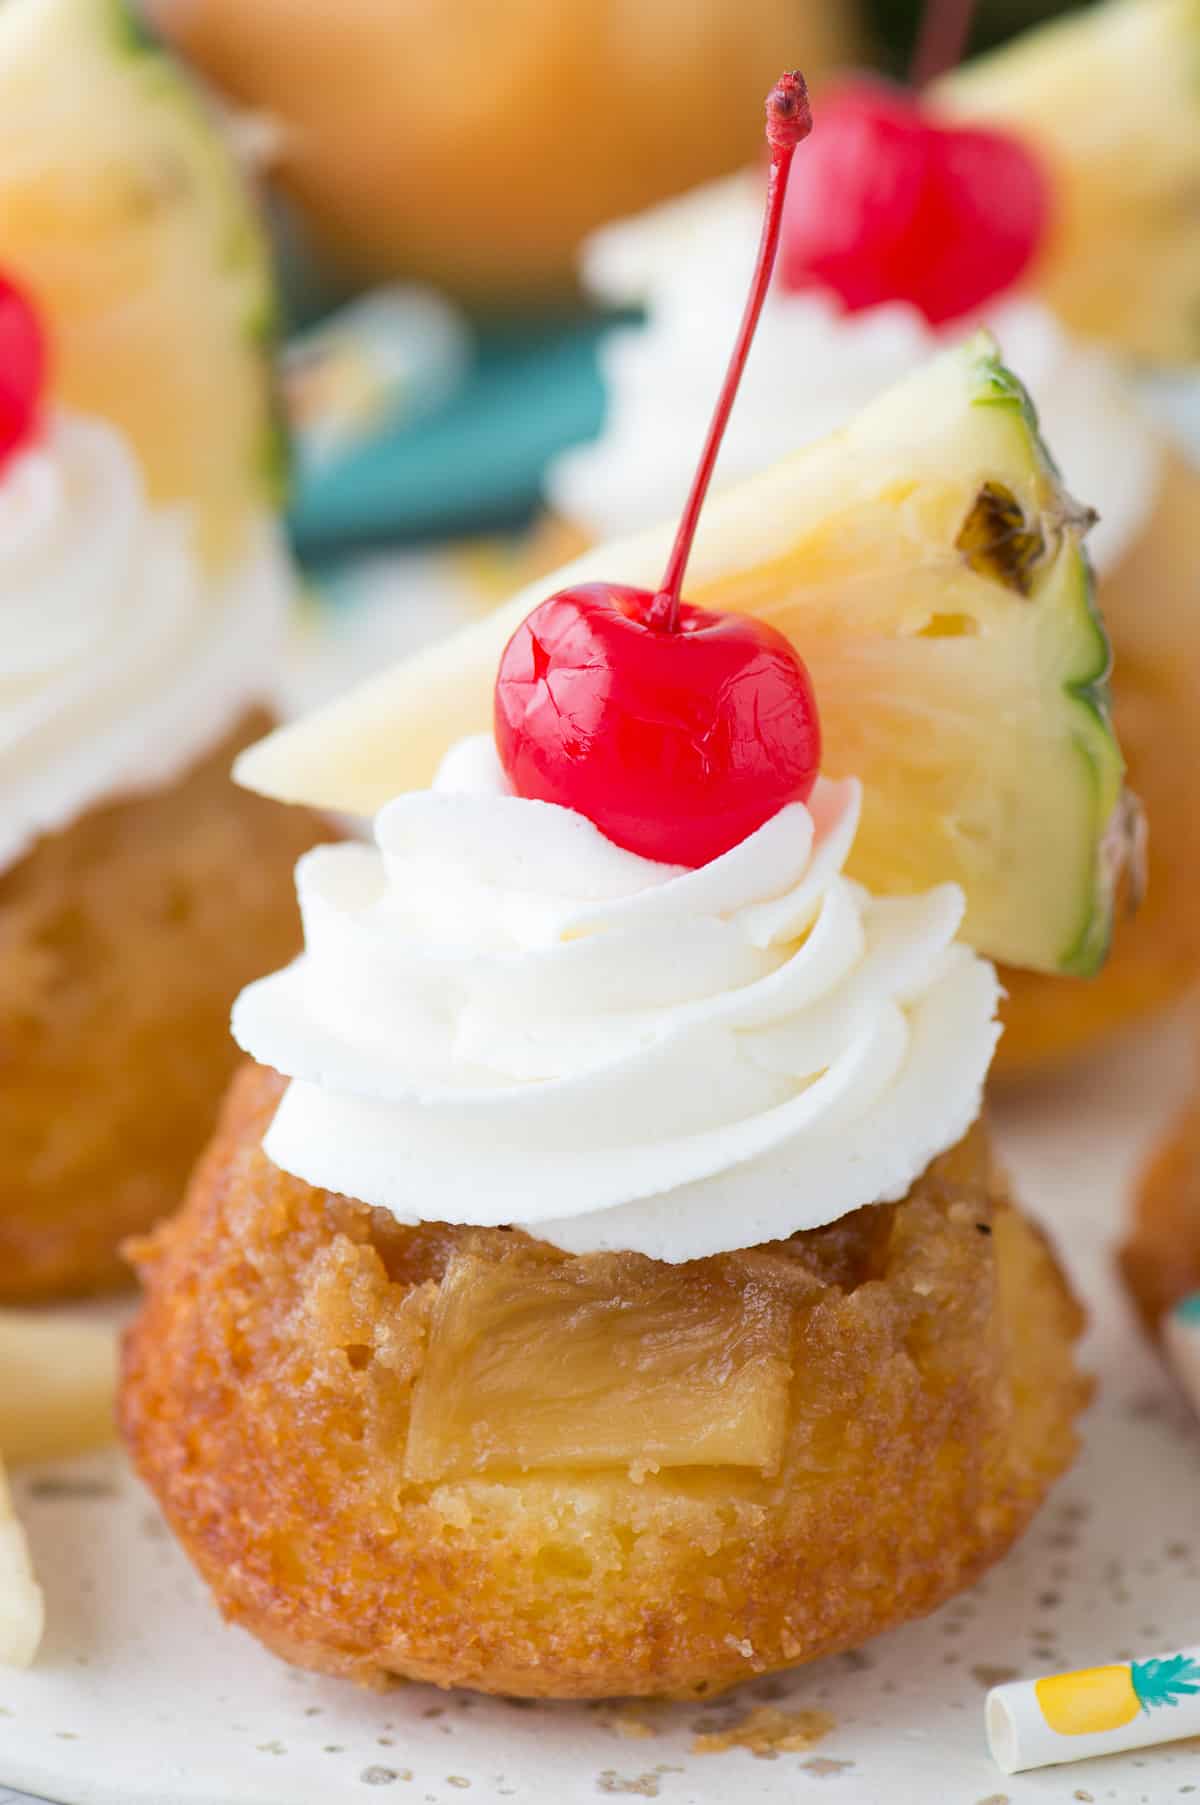 mini pineapple upside down cakes with whipped cream, a cherry and pineapple slice on white plate